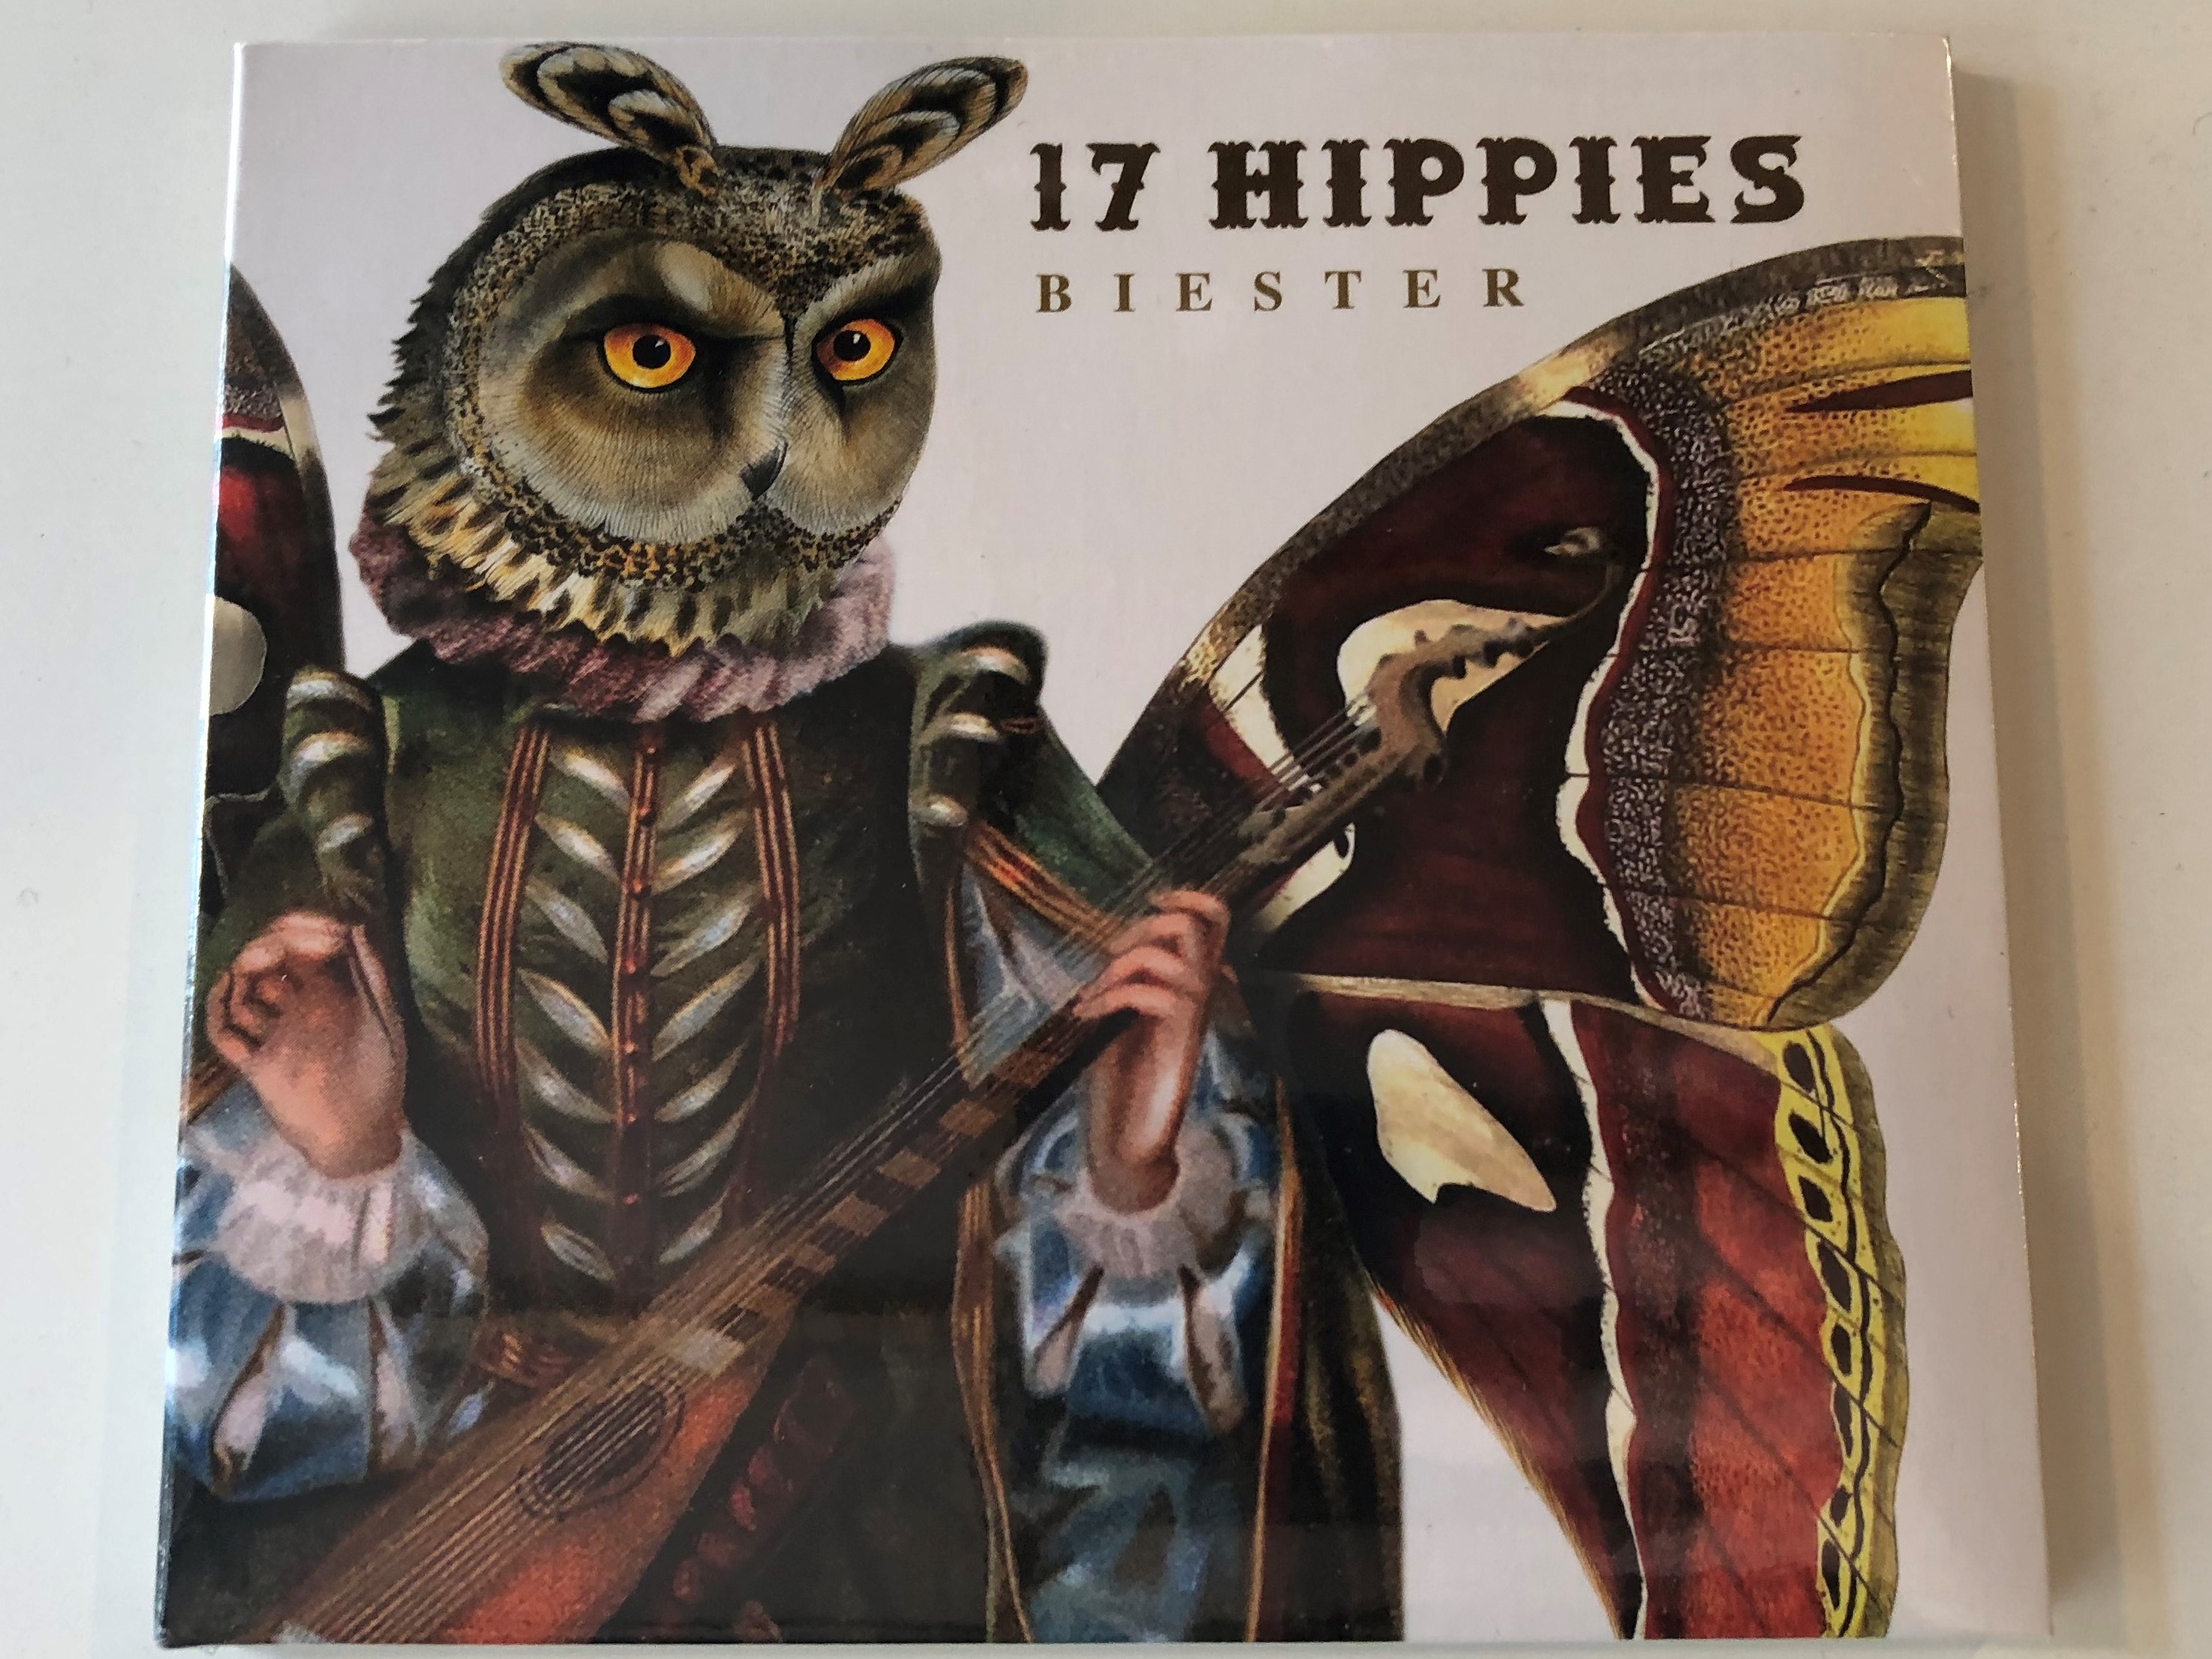 17-hippies-biester-hipster-records-audio-cd-2014-hip-016-1-.jpg